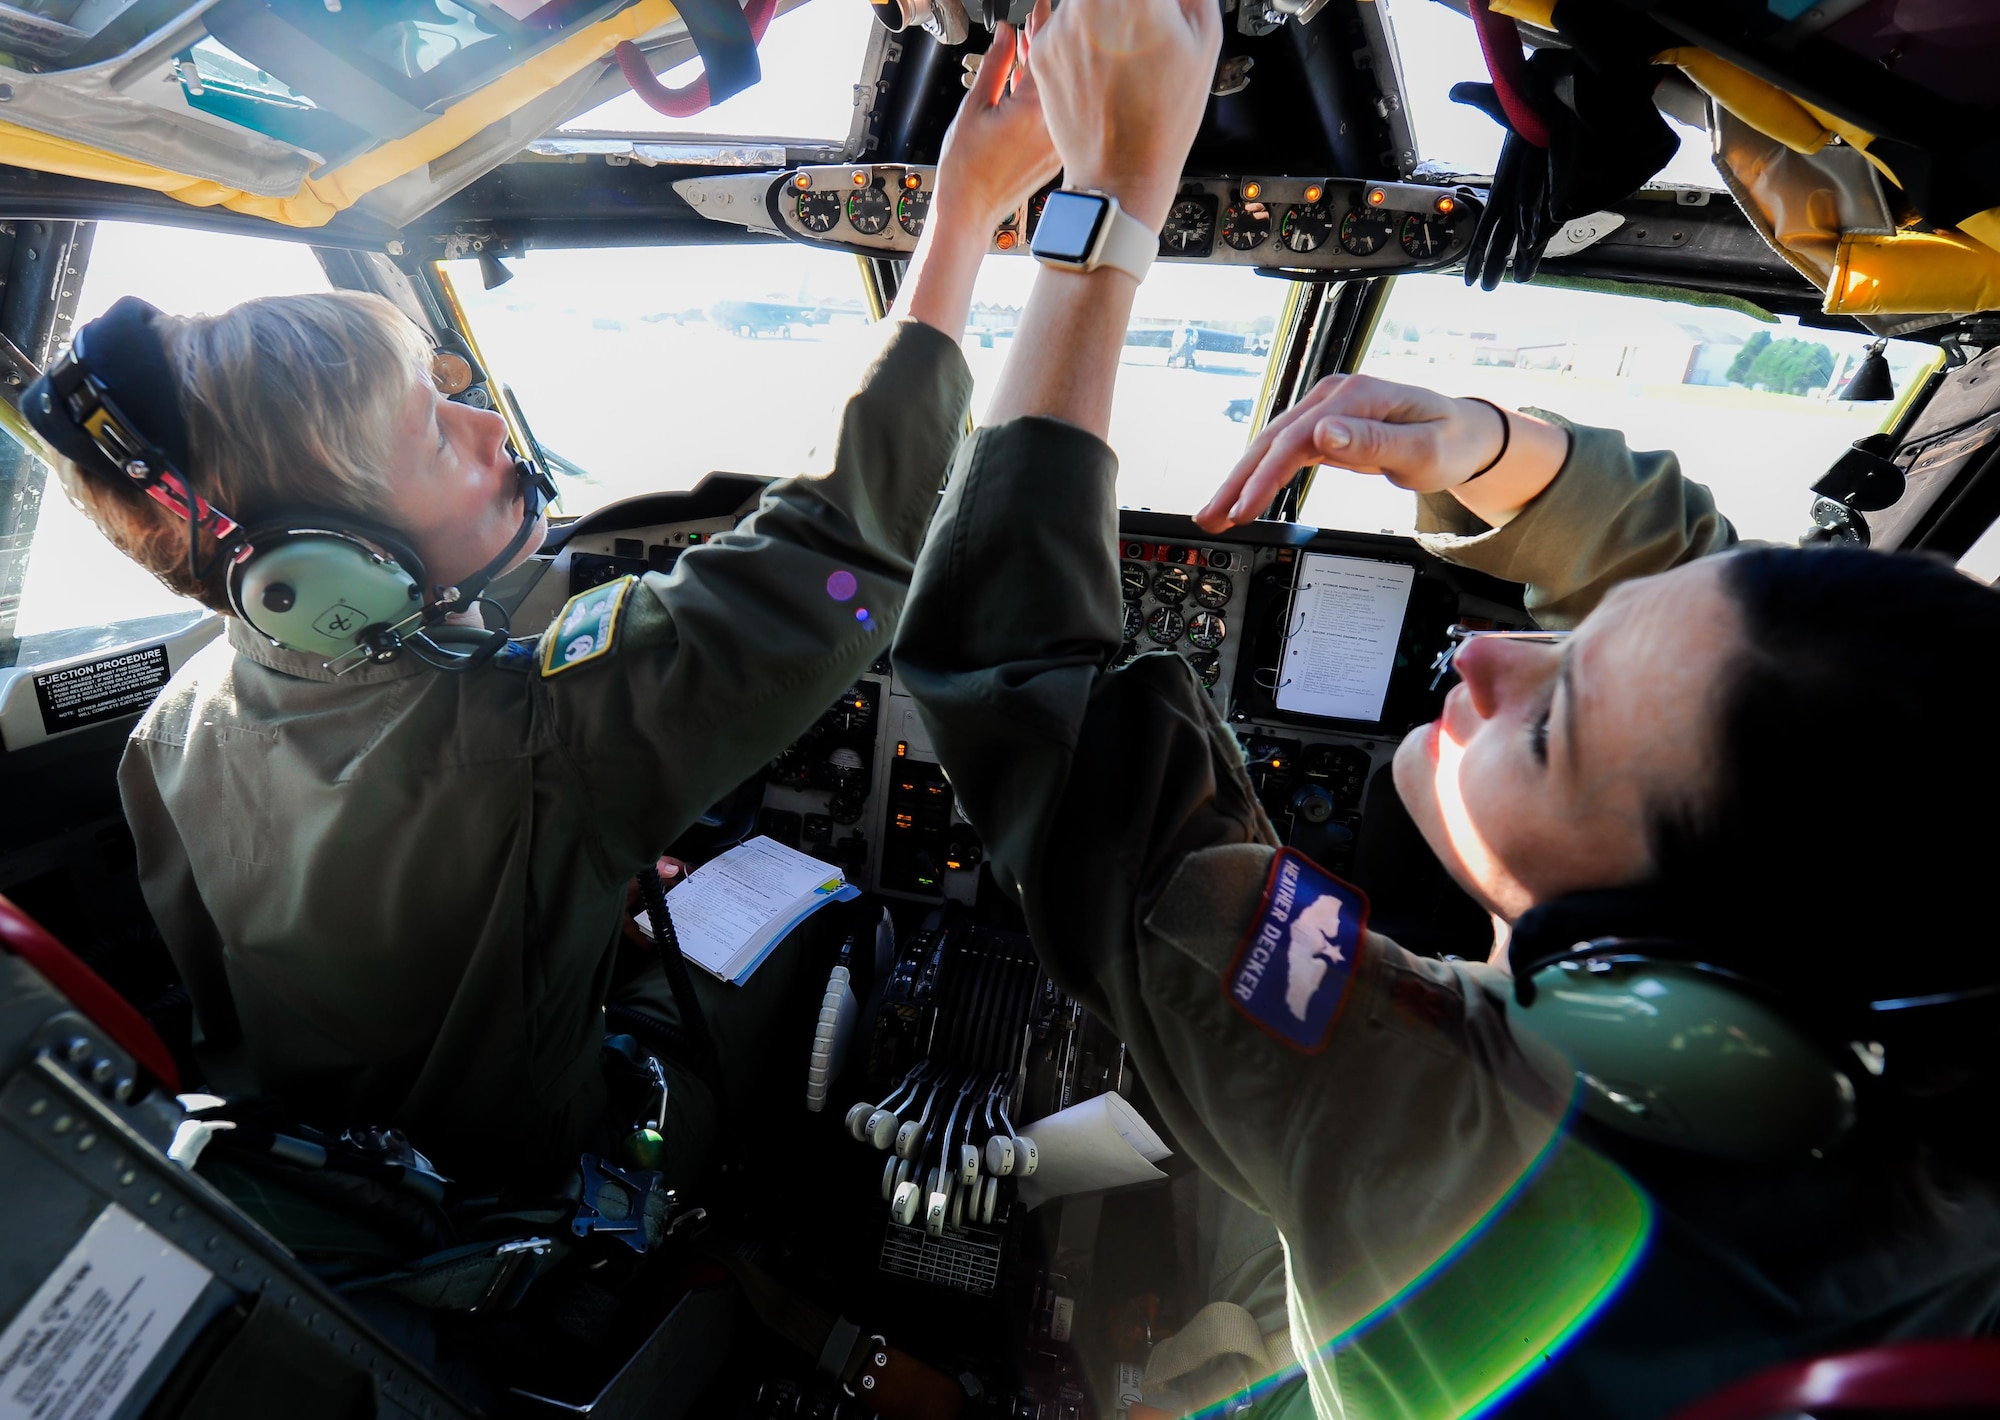 Col. Kristin Goodwin, 2nd Bomb Wing commander, and Maj. Heather Decker, 93rd Bomb Squadron instructor pilot, go through their preflight checklist prior to takeoff at Barksdale Air Force Base, La., March 22, 2016. This B-52 Stratofortress formation highlights the contributions of women who have served our country throughout American history. (U.S. Air Force photo/2nd LT. Jessica Adams)